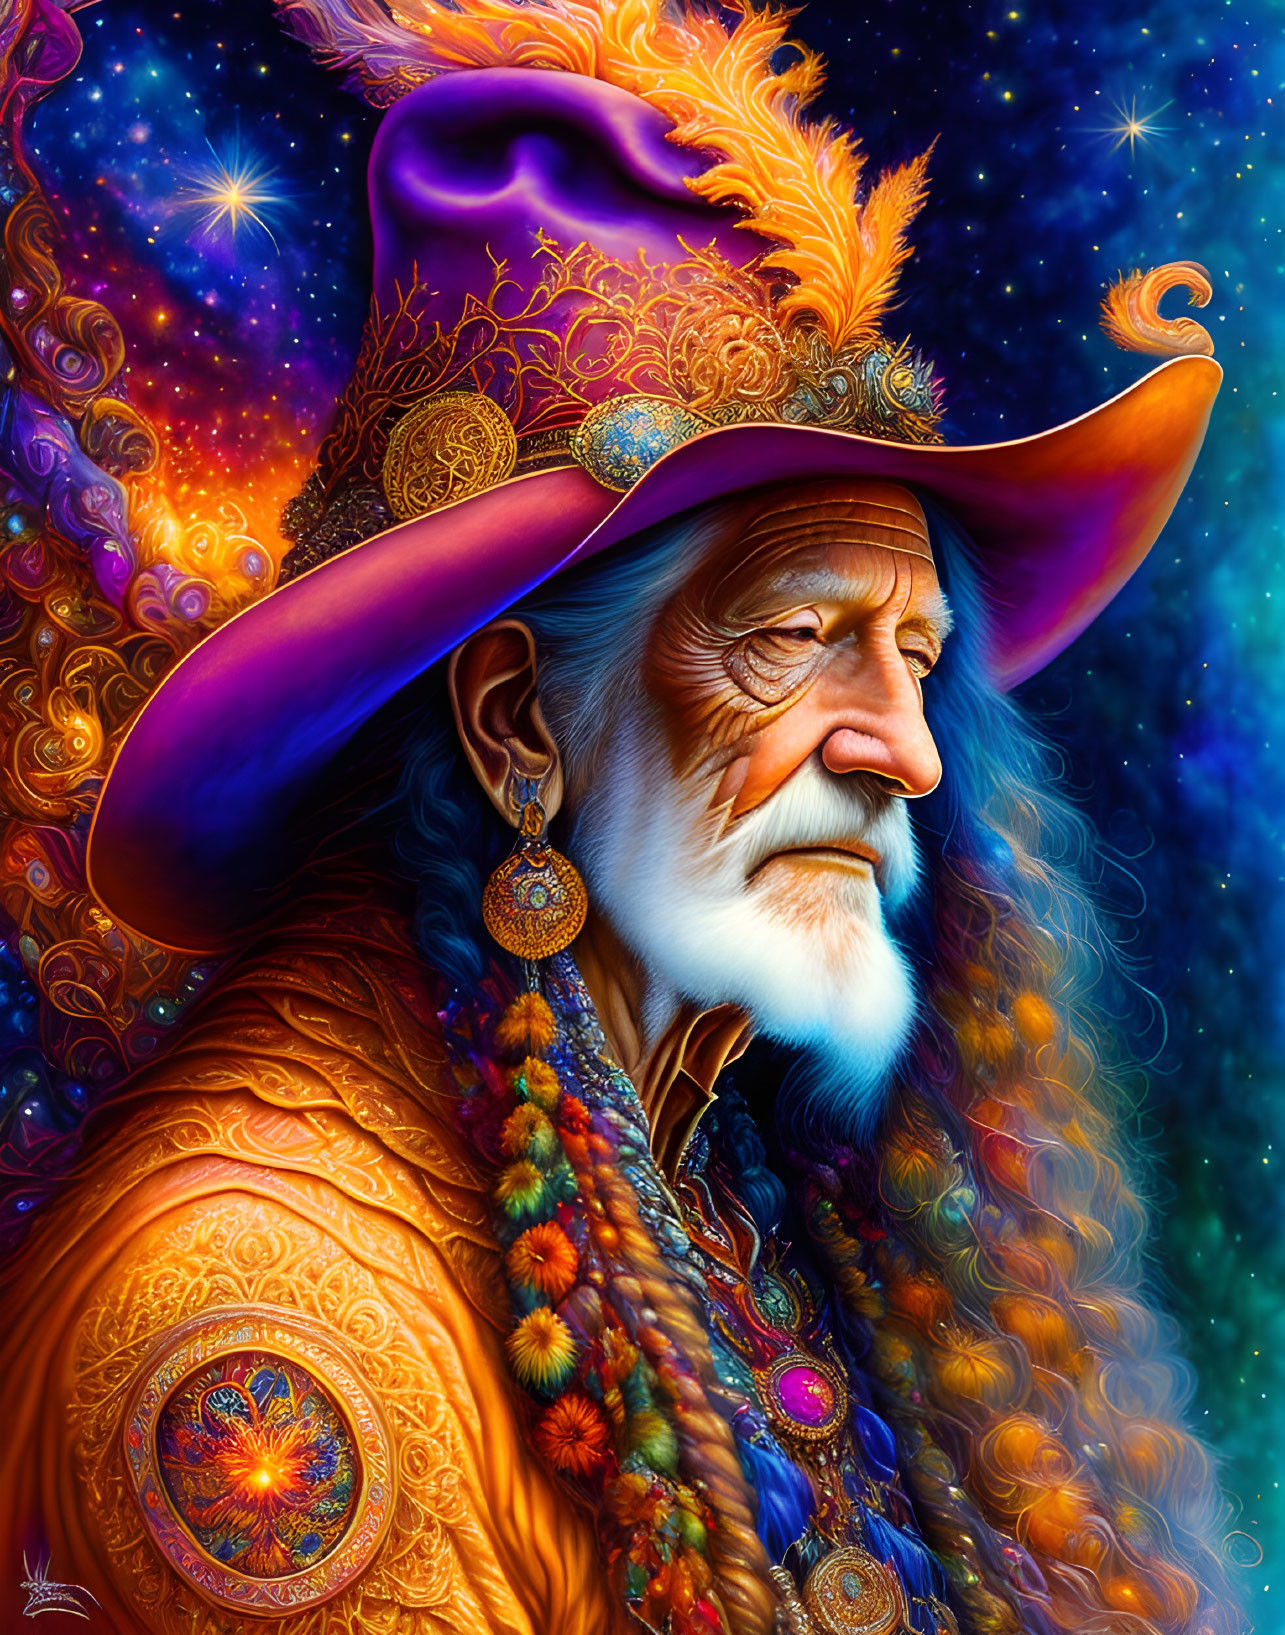 Colorful portrait of an old man in purple hat and ornate orange robe